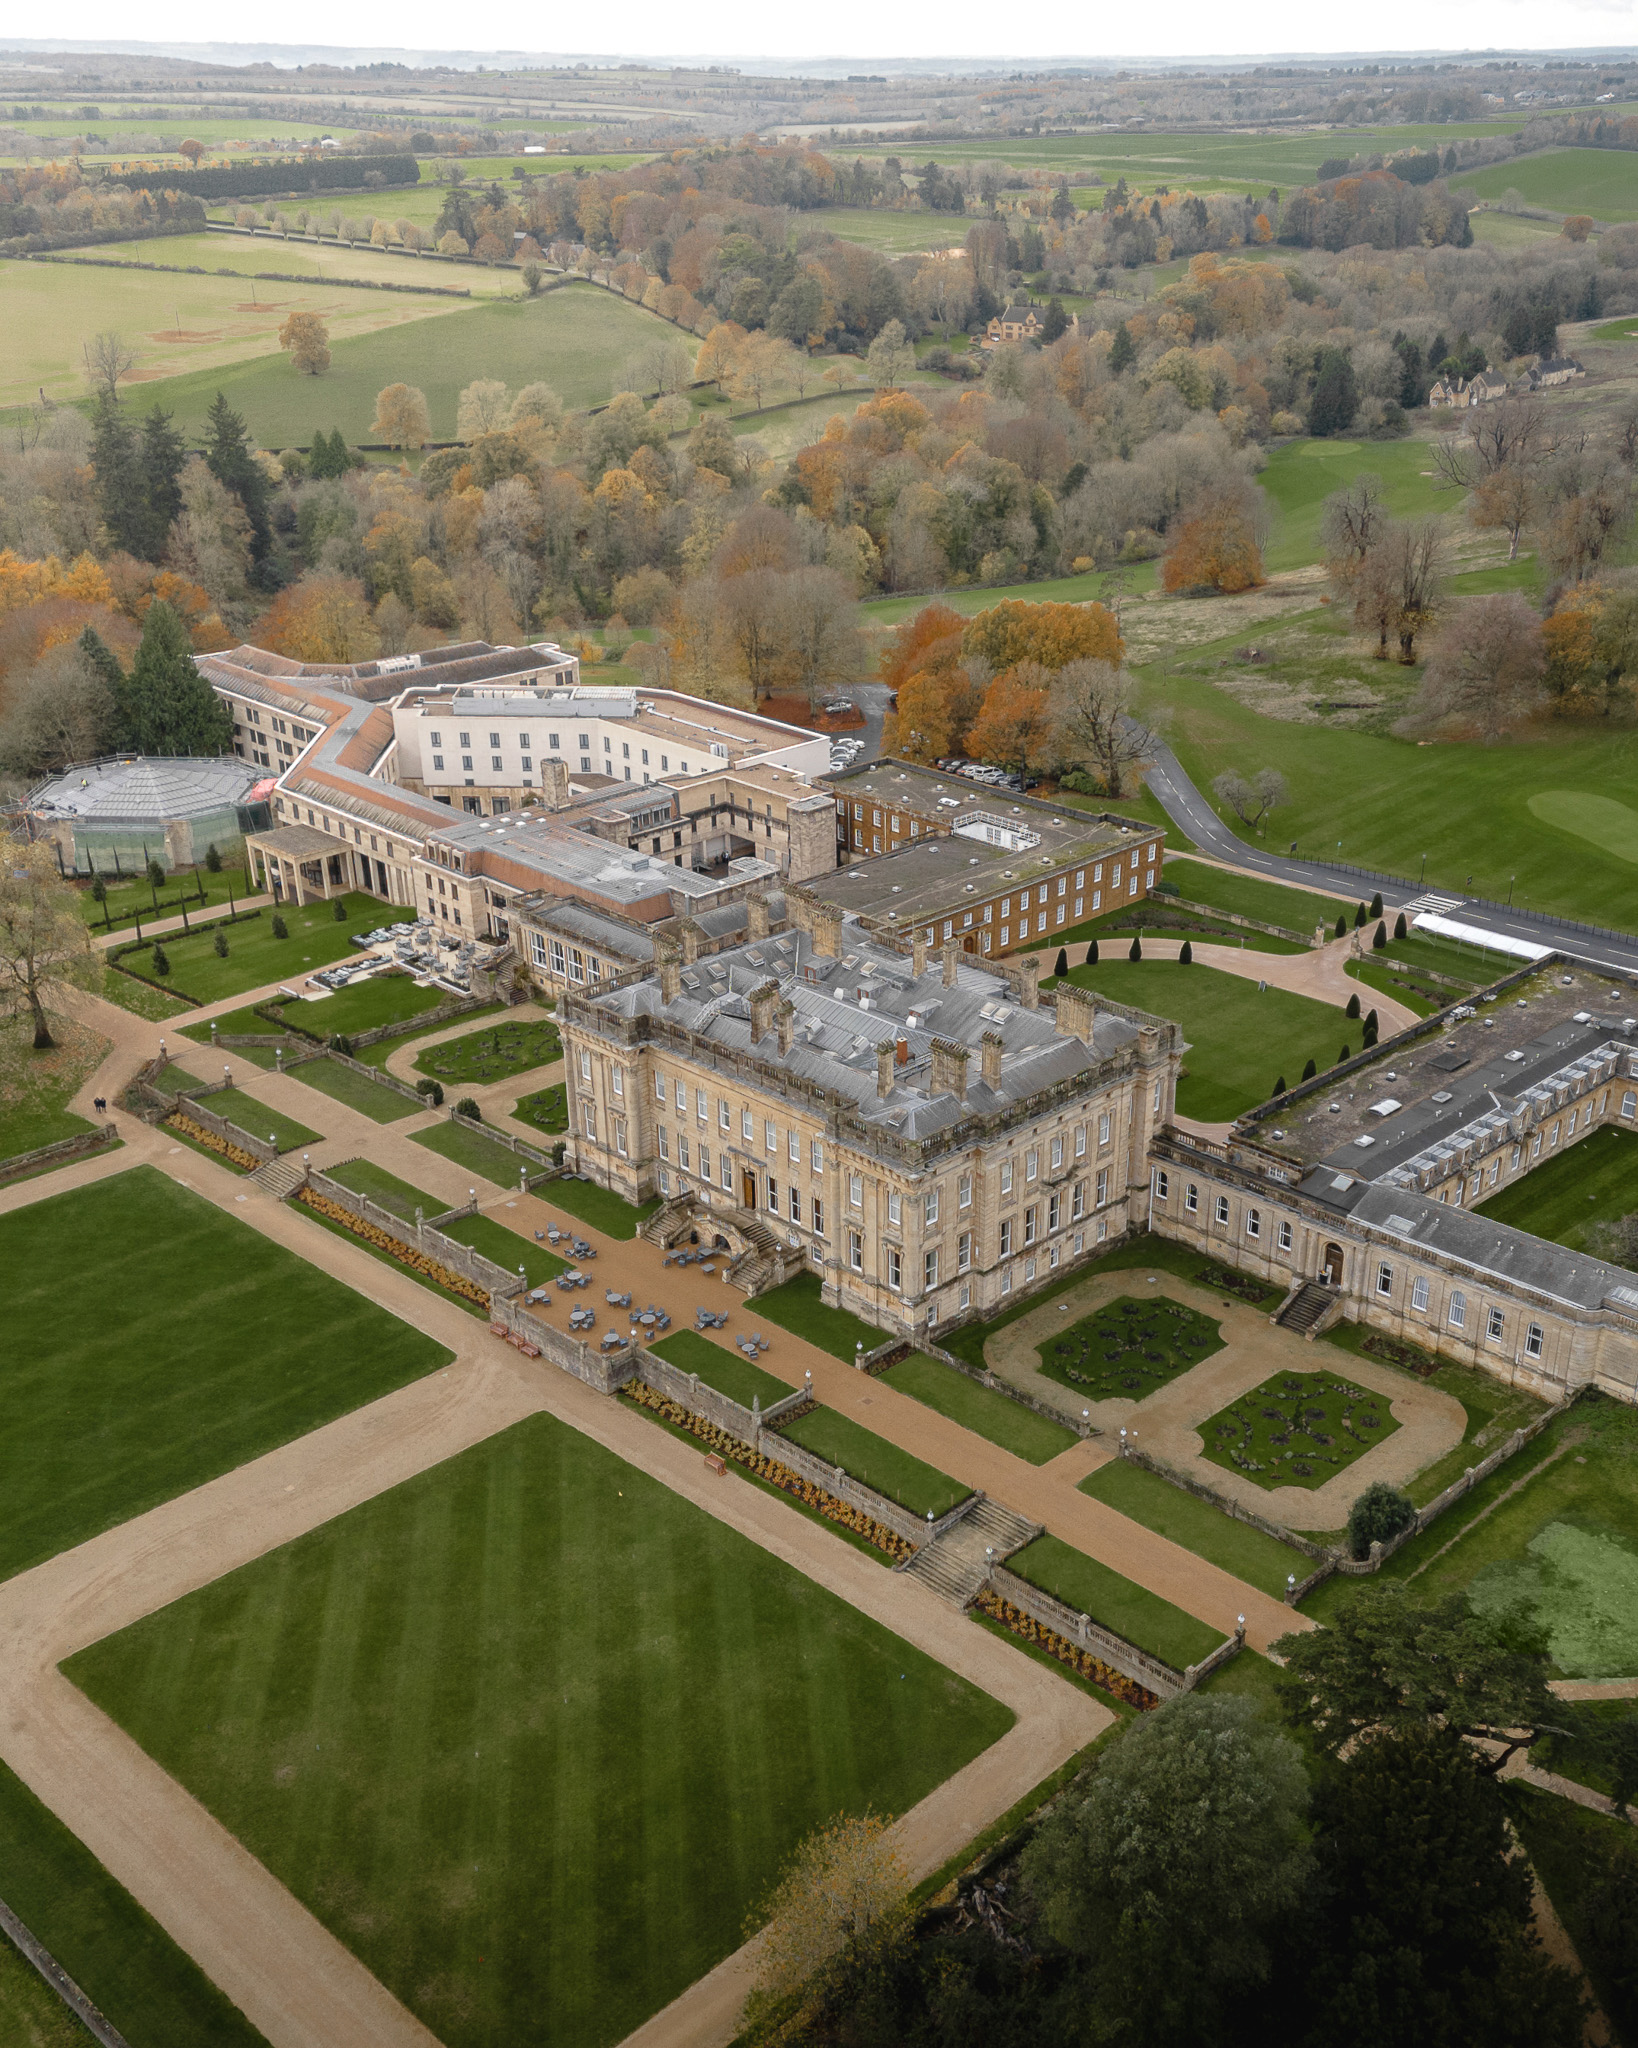 Heythrop Park, which is situated amid 440 acres, has undergone a £40million renovation